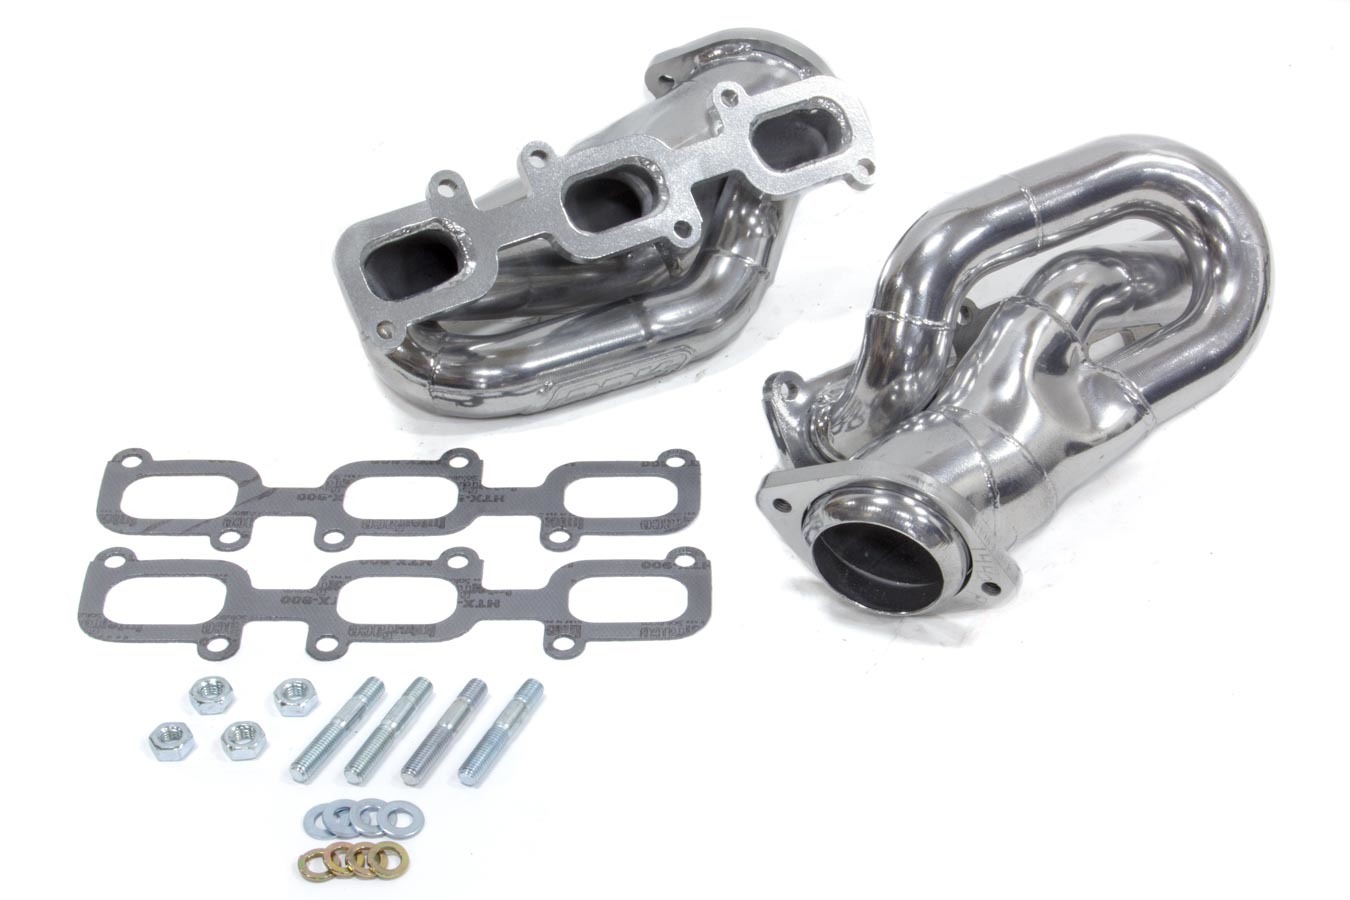 BBK Headers, Tuned Length Shorty, 1-5/8" Primary, Stock Collector Flange, Steel, Metallic Ceramic, Ford V6, Ford M